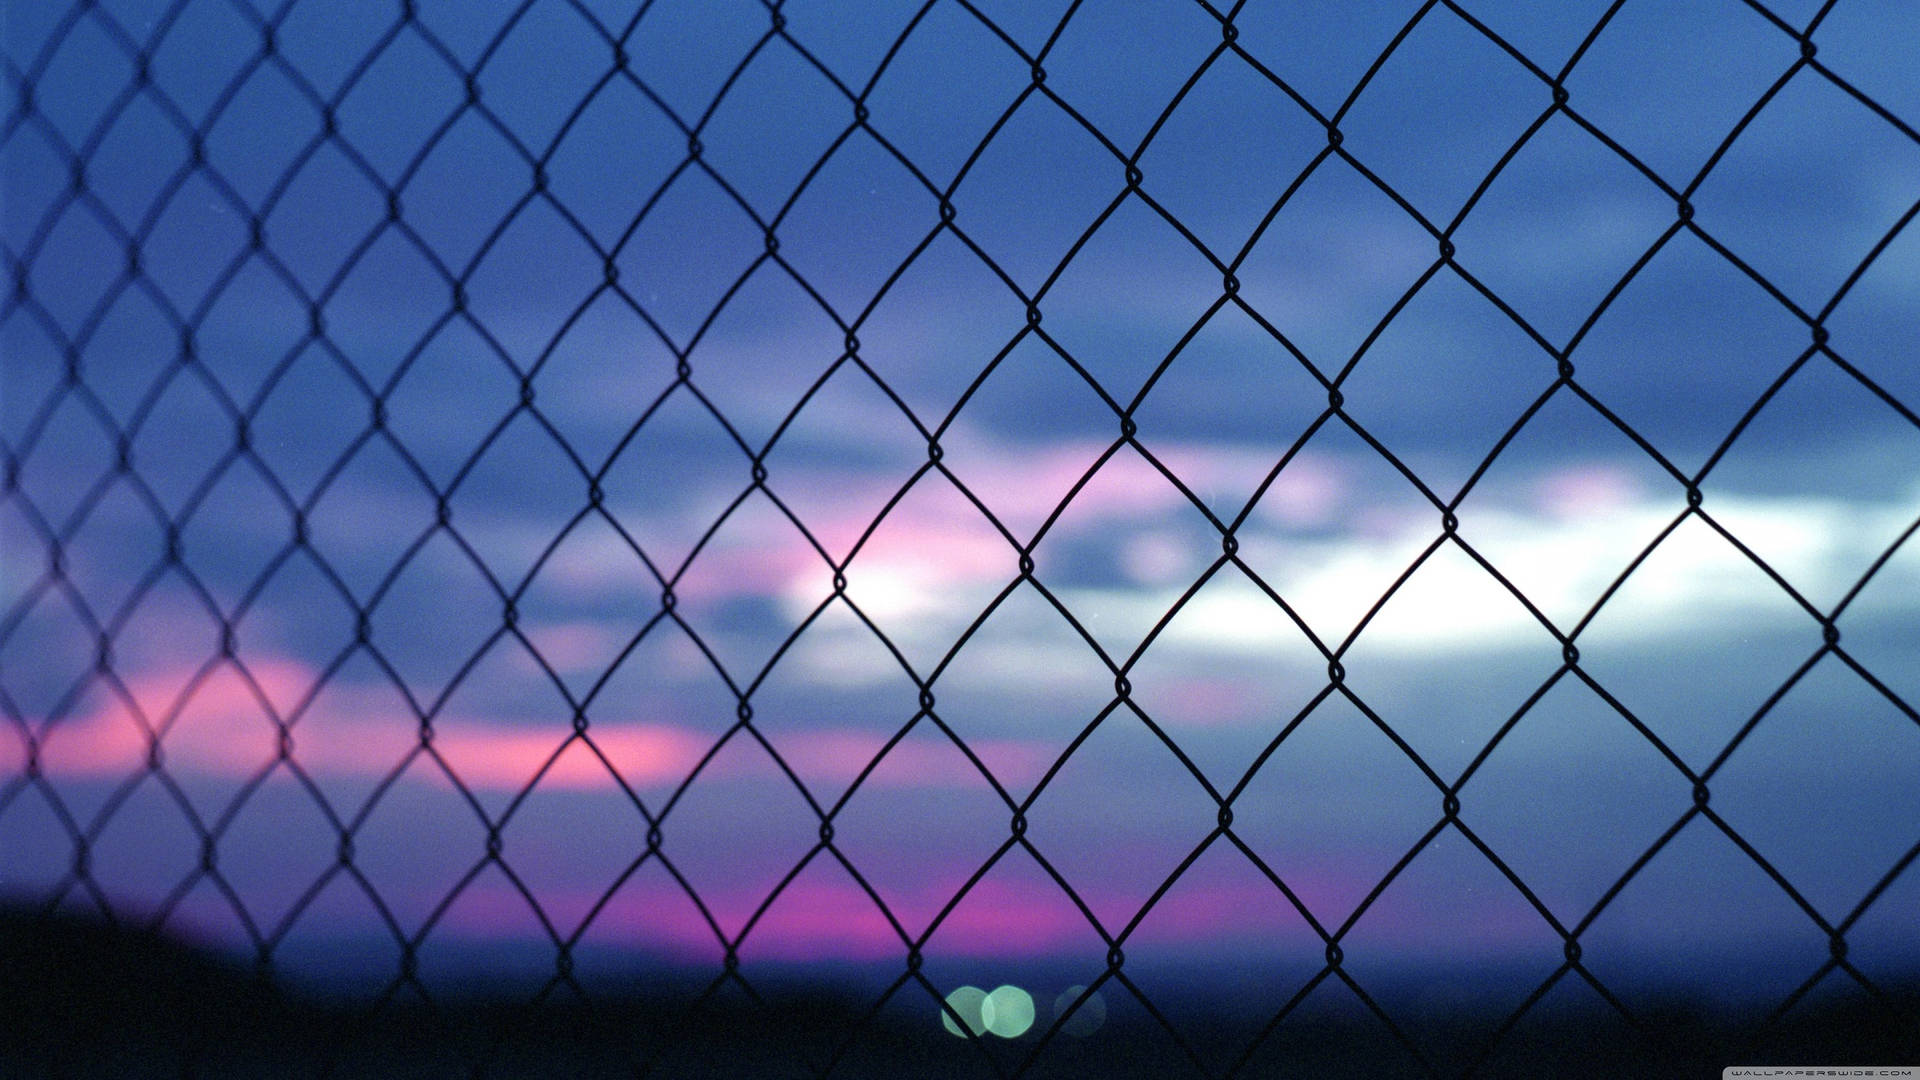 Aesthetic Tumblr Sky Behind Fence Background